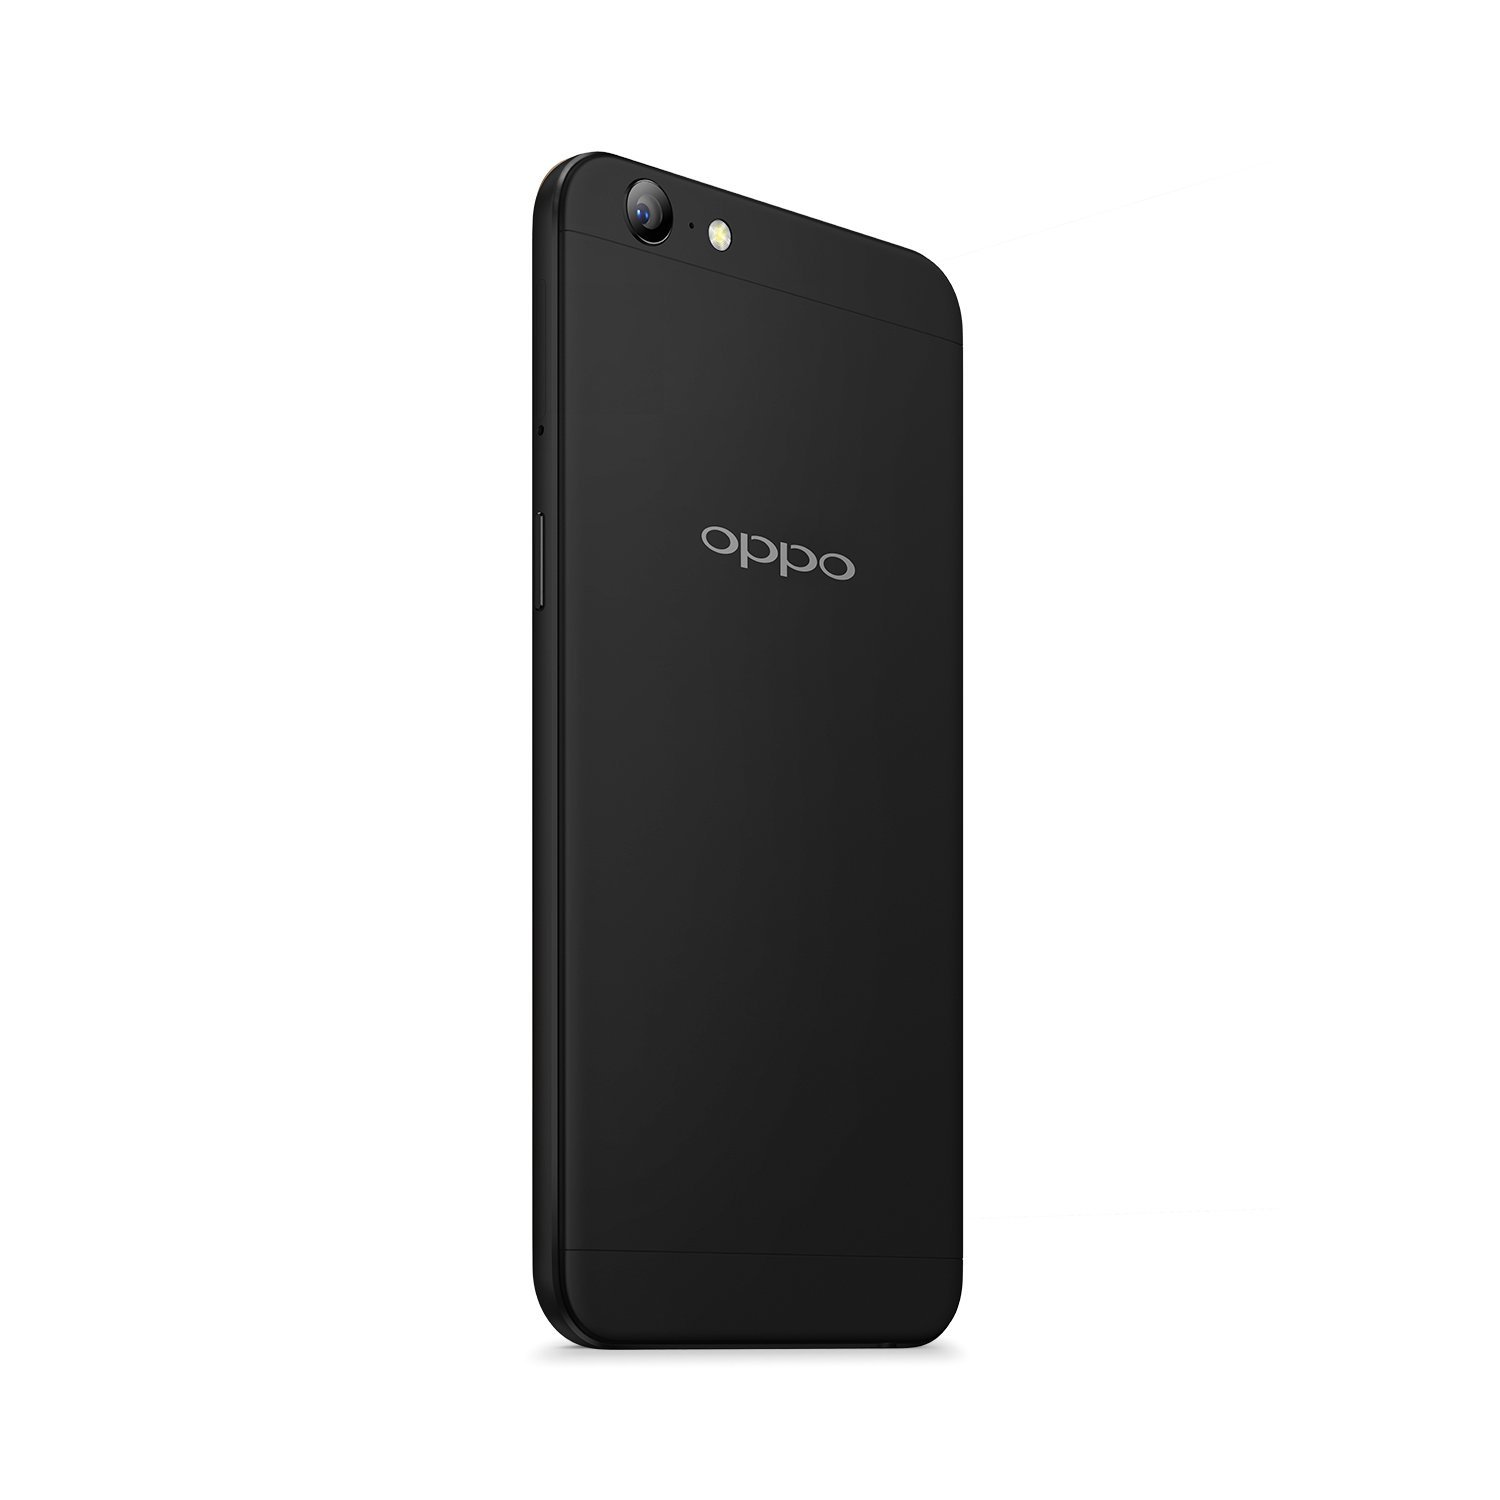 Oppo A57 (Black, 32GB) without Offers: Amazon.in: Electronics